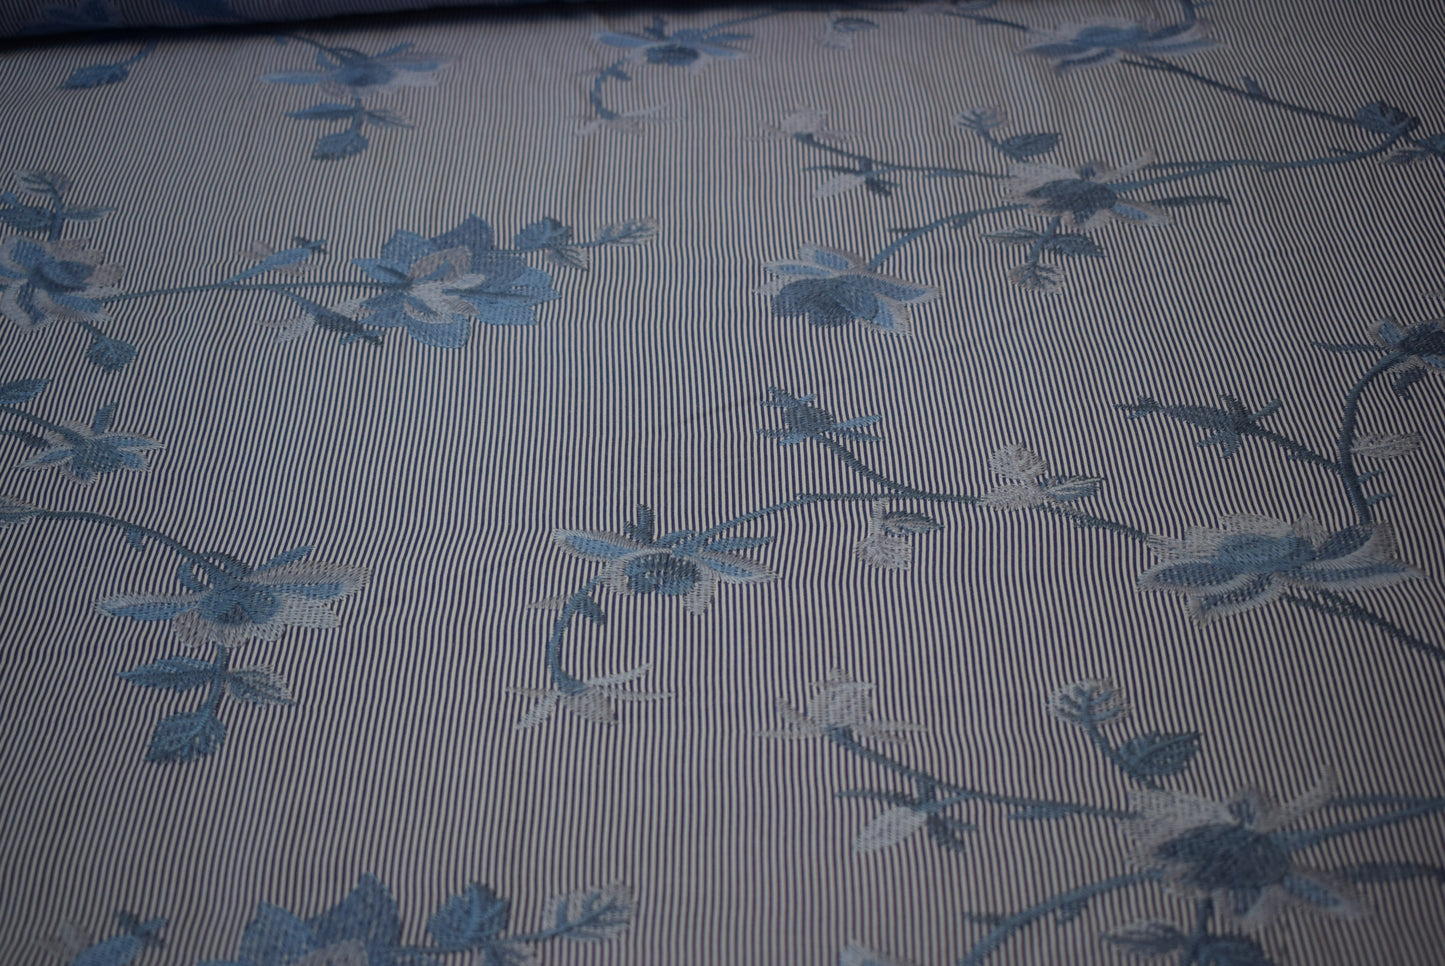 Blue Embroidery on Ticking Stripe